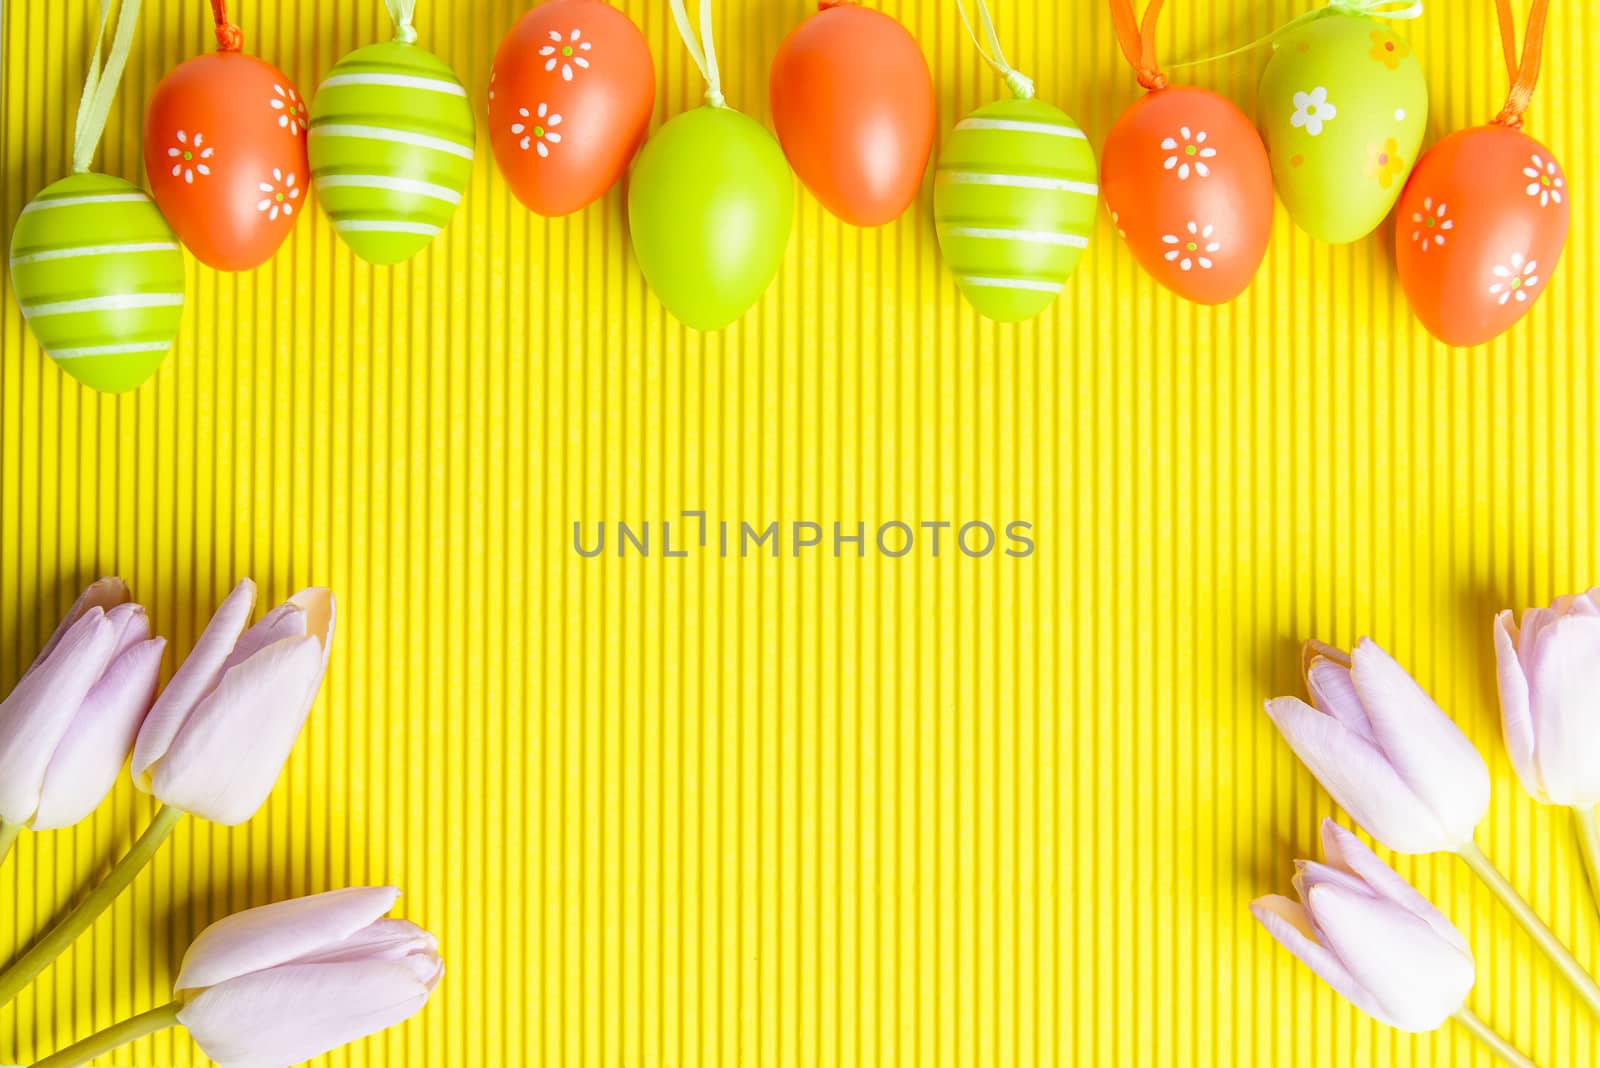 Easter arrangement on yellow background, visible orange and green  decorated eggs and pink tulips in right and left corner, space for text provided.